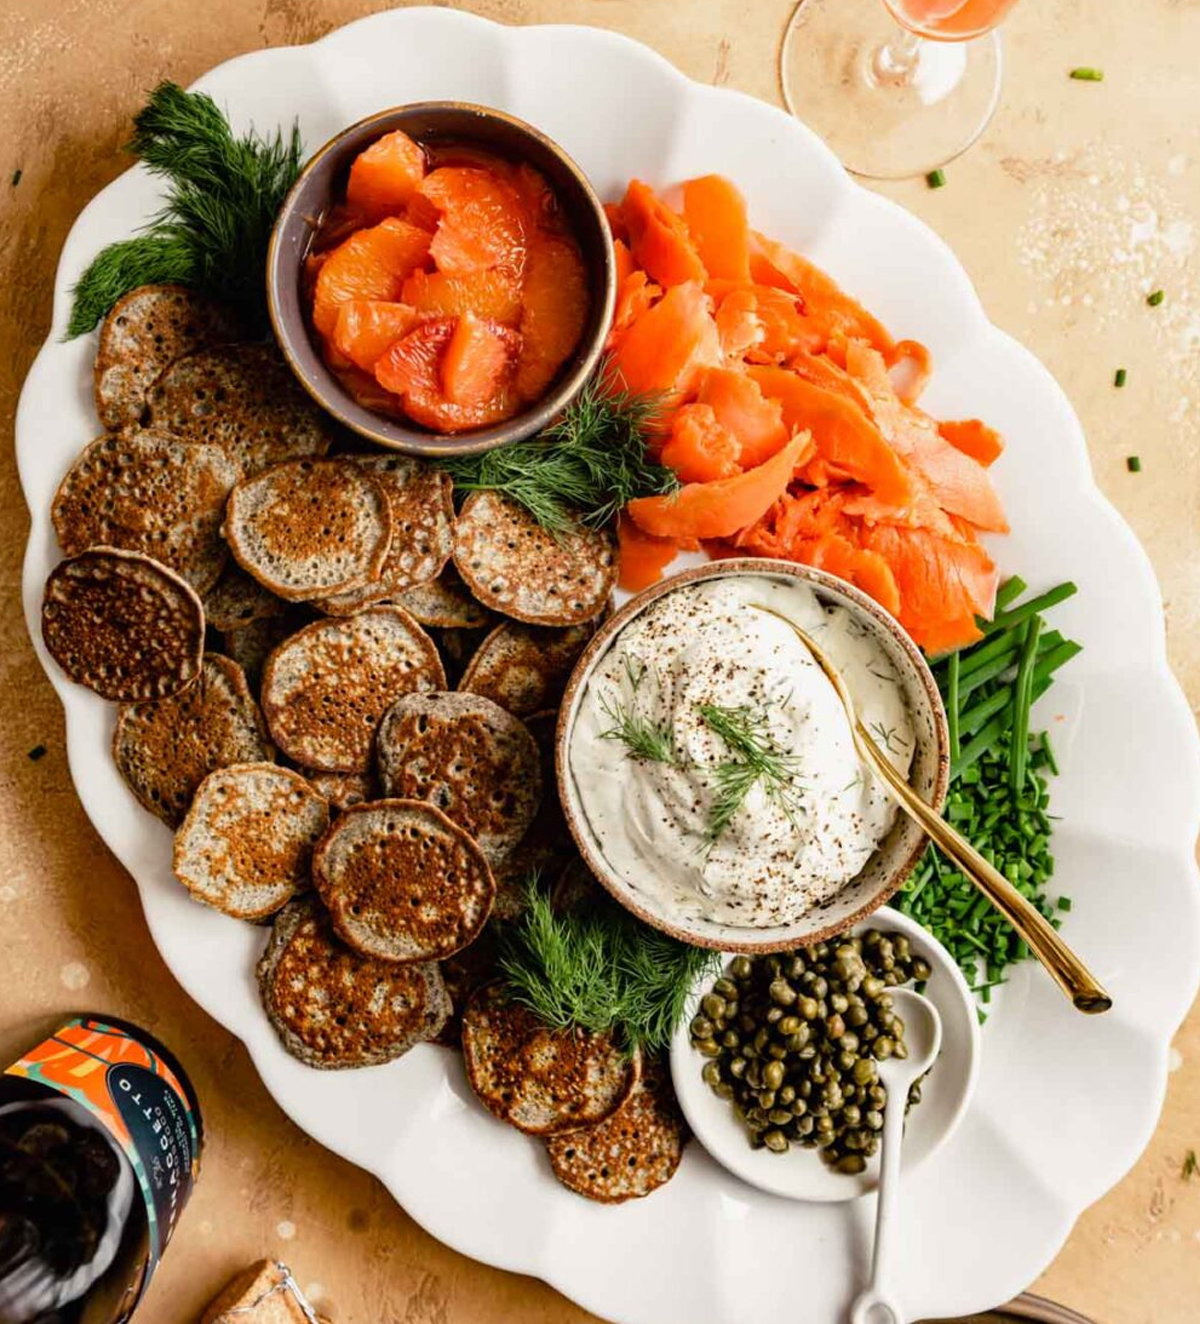 Zestful Kitchen's salmon board is full of smoked salmon, dill, and capers.